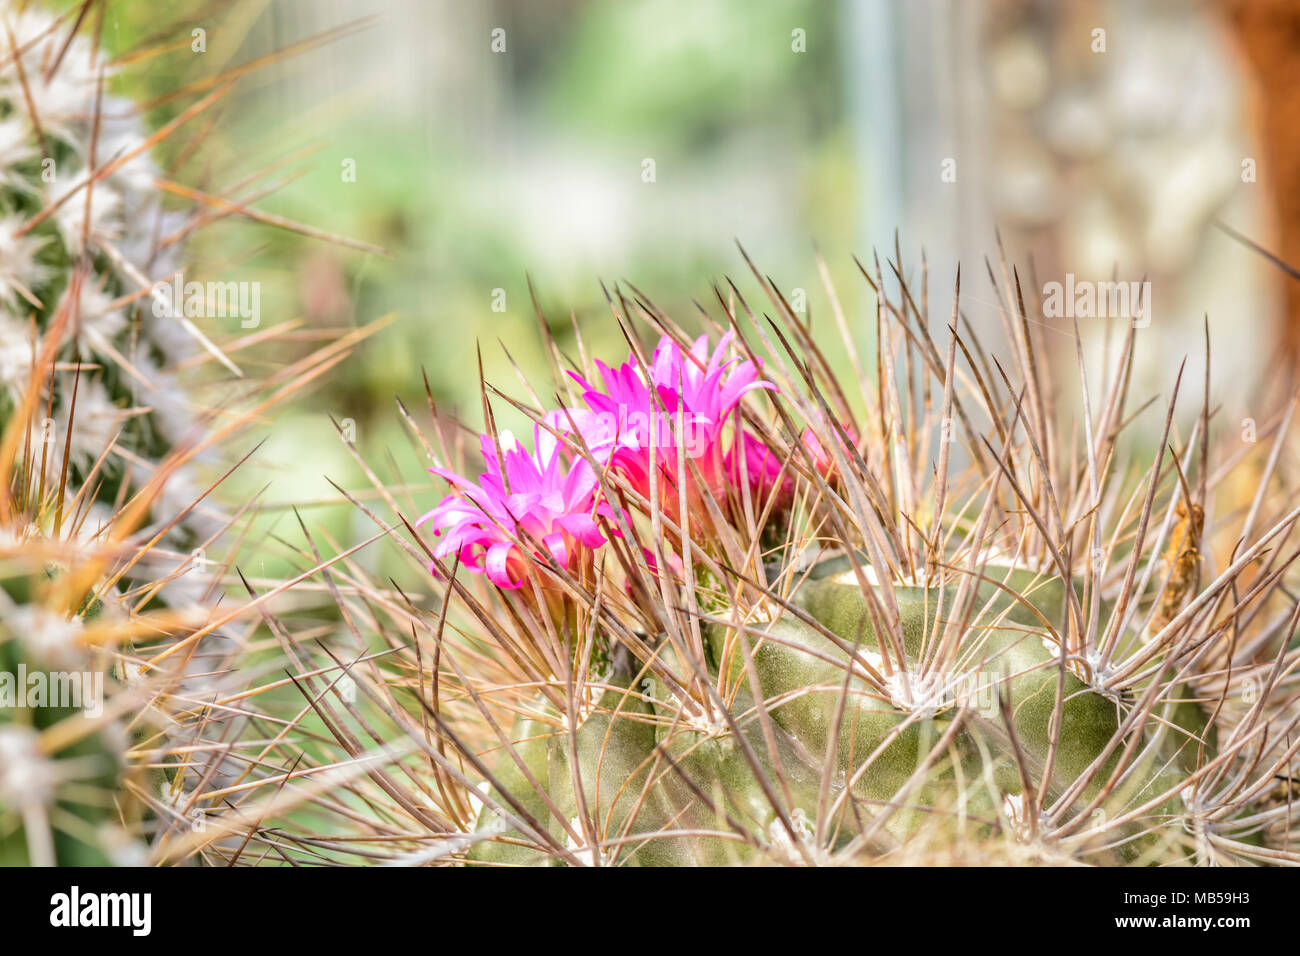 purple flowers of a cactus eriosyce against blurry background Stock Photo